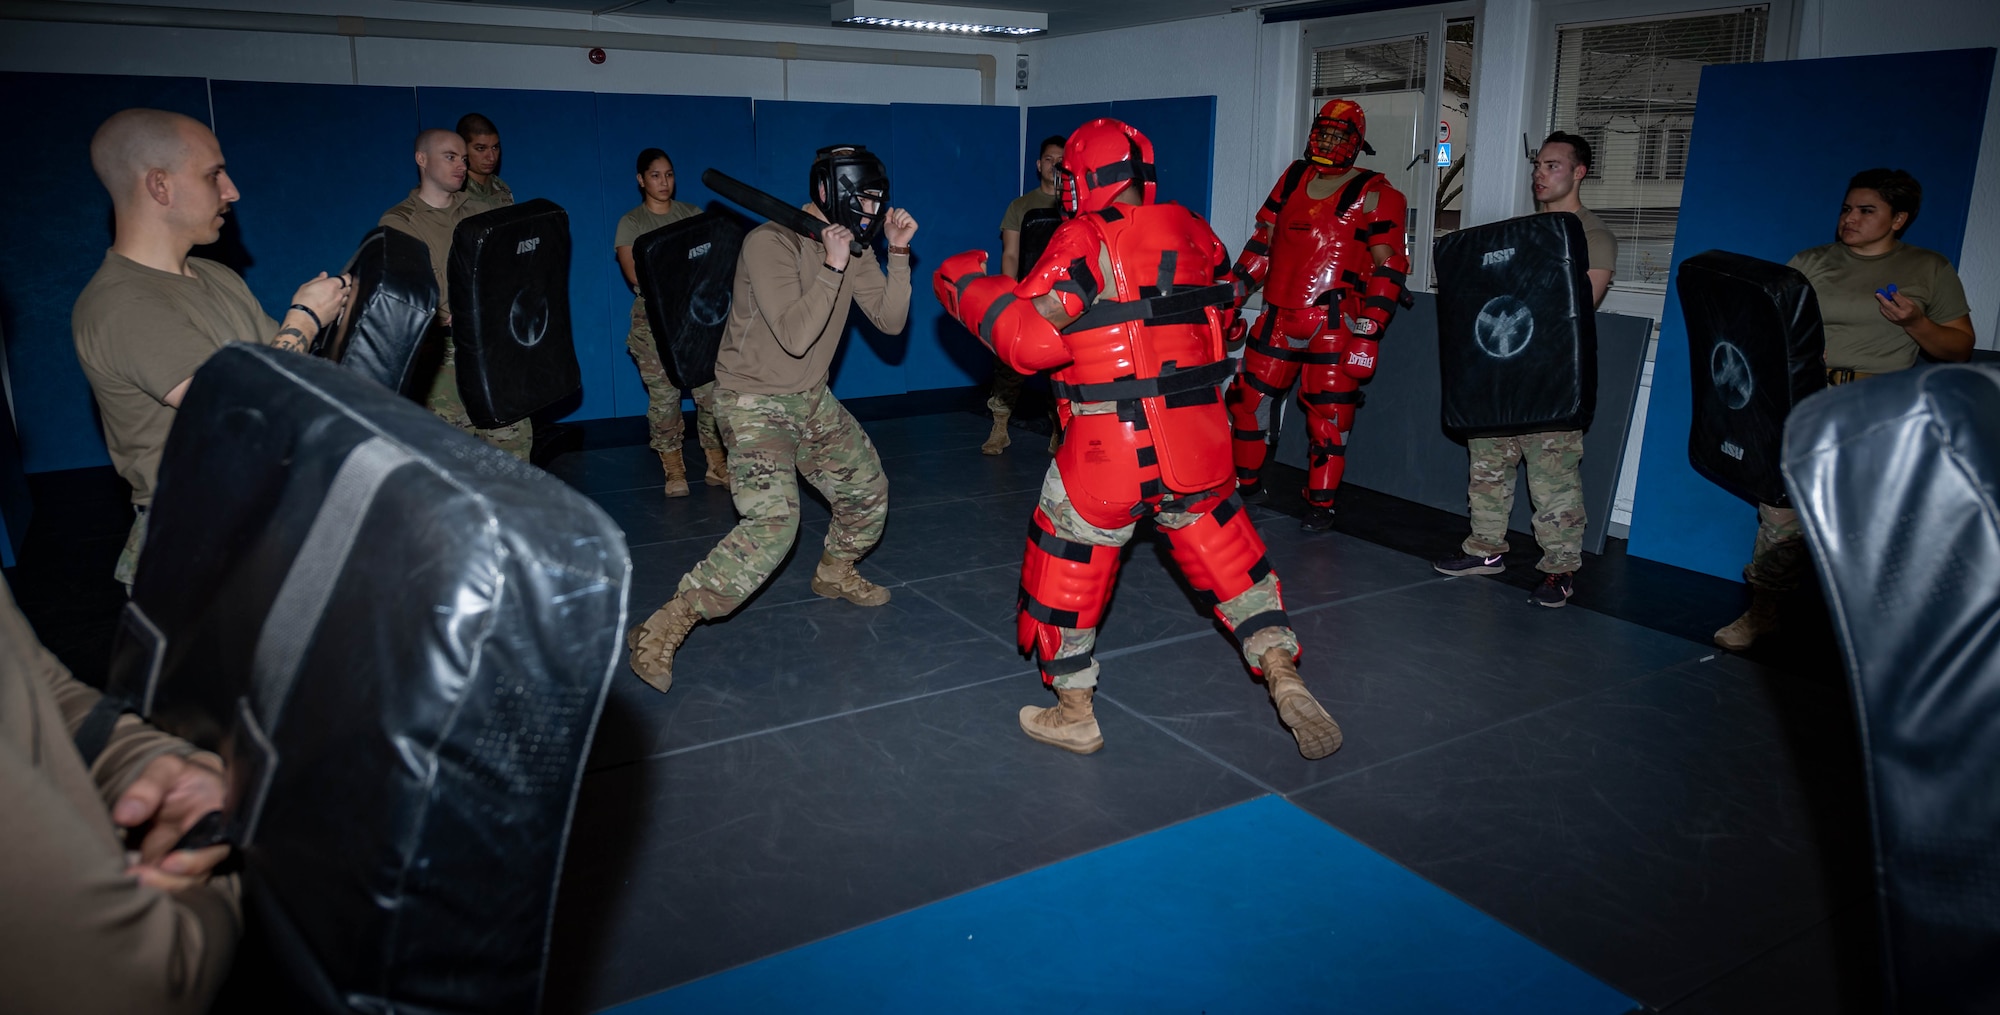 Airmen assigned to the 569th United States Forces Police Squadron, undergo Red Man training at Vogelweh Air Station, Germany, Dec. 6, 2021. During Red Man training, Airmen are provided with safety gear and a baton-like weapon and must defend themself from the instructor who’s wearing Red Man training gear. (U.S. Air Force photo by Airman Jared Lovett)